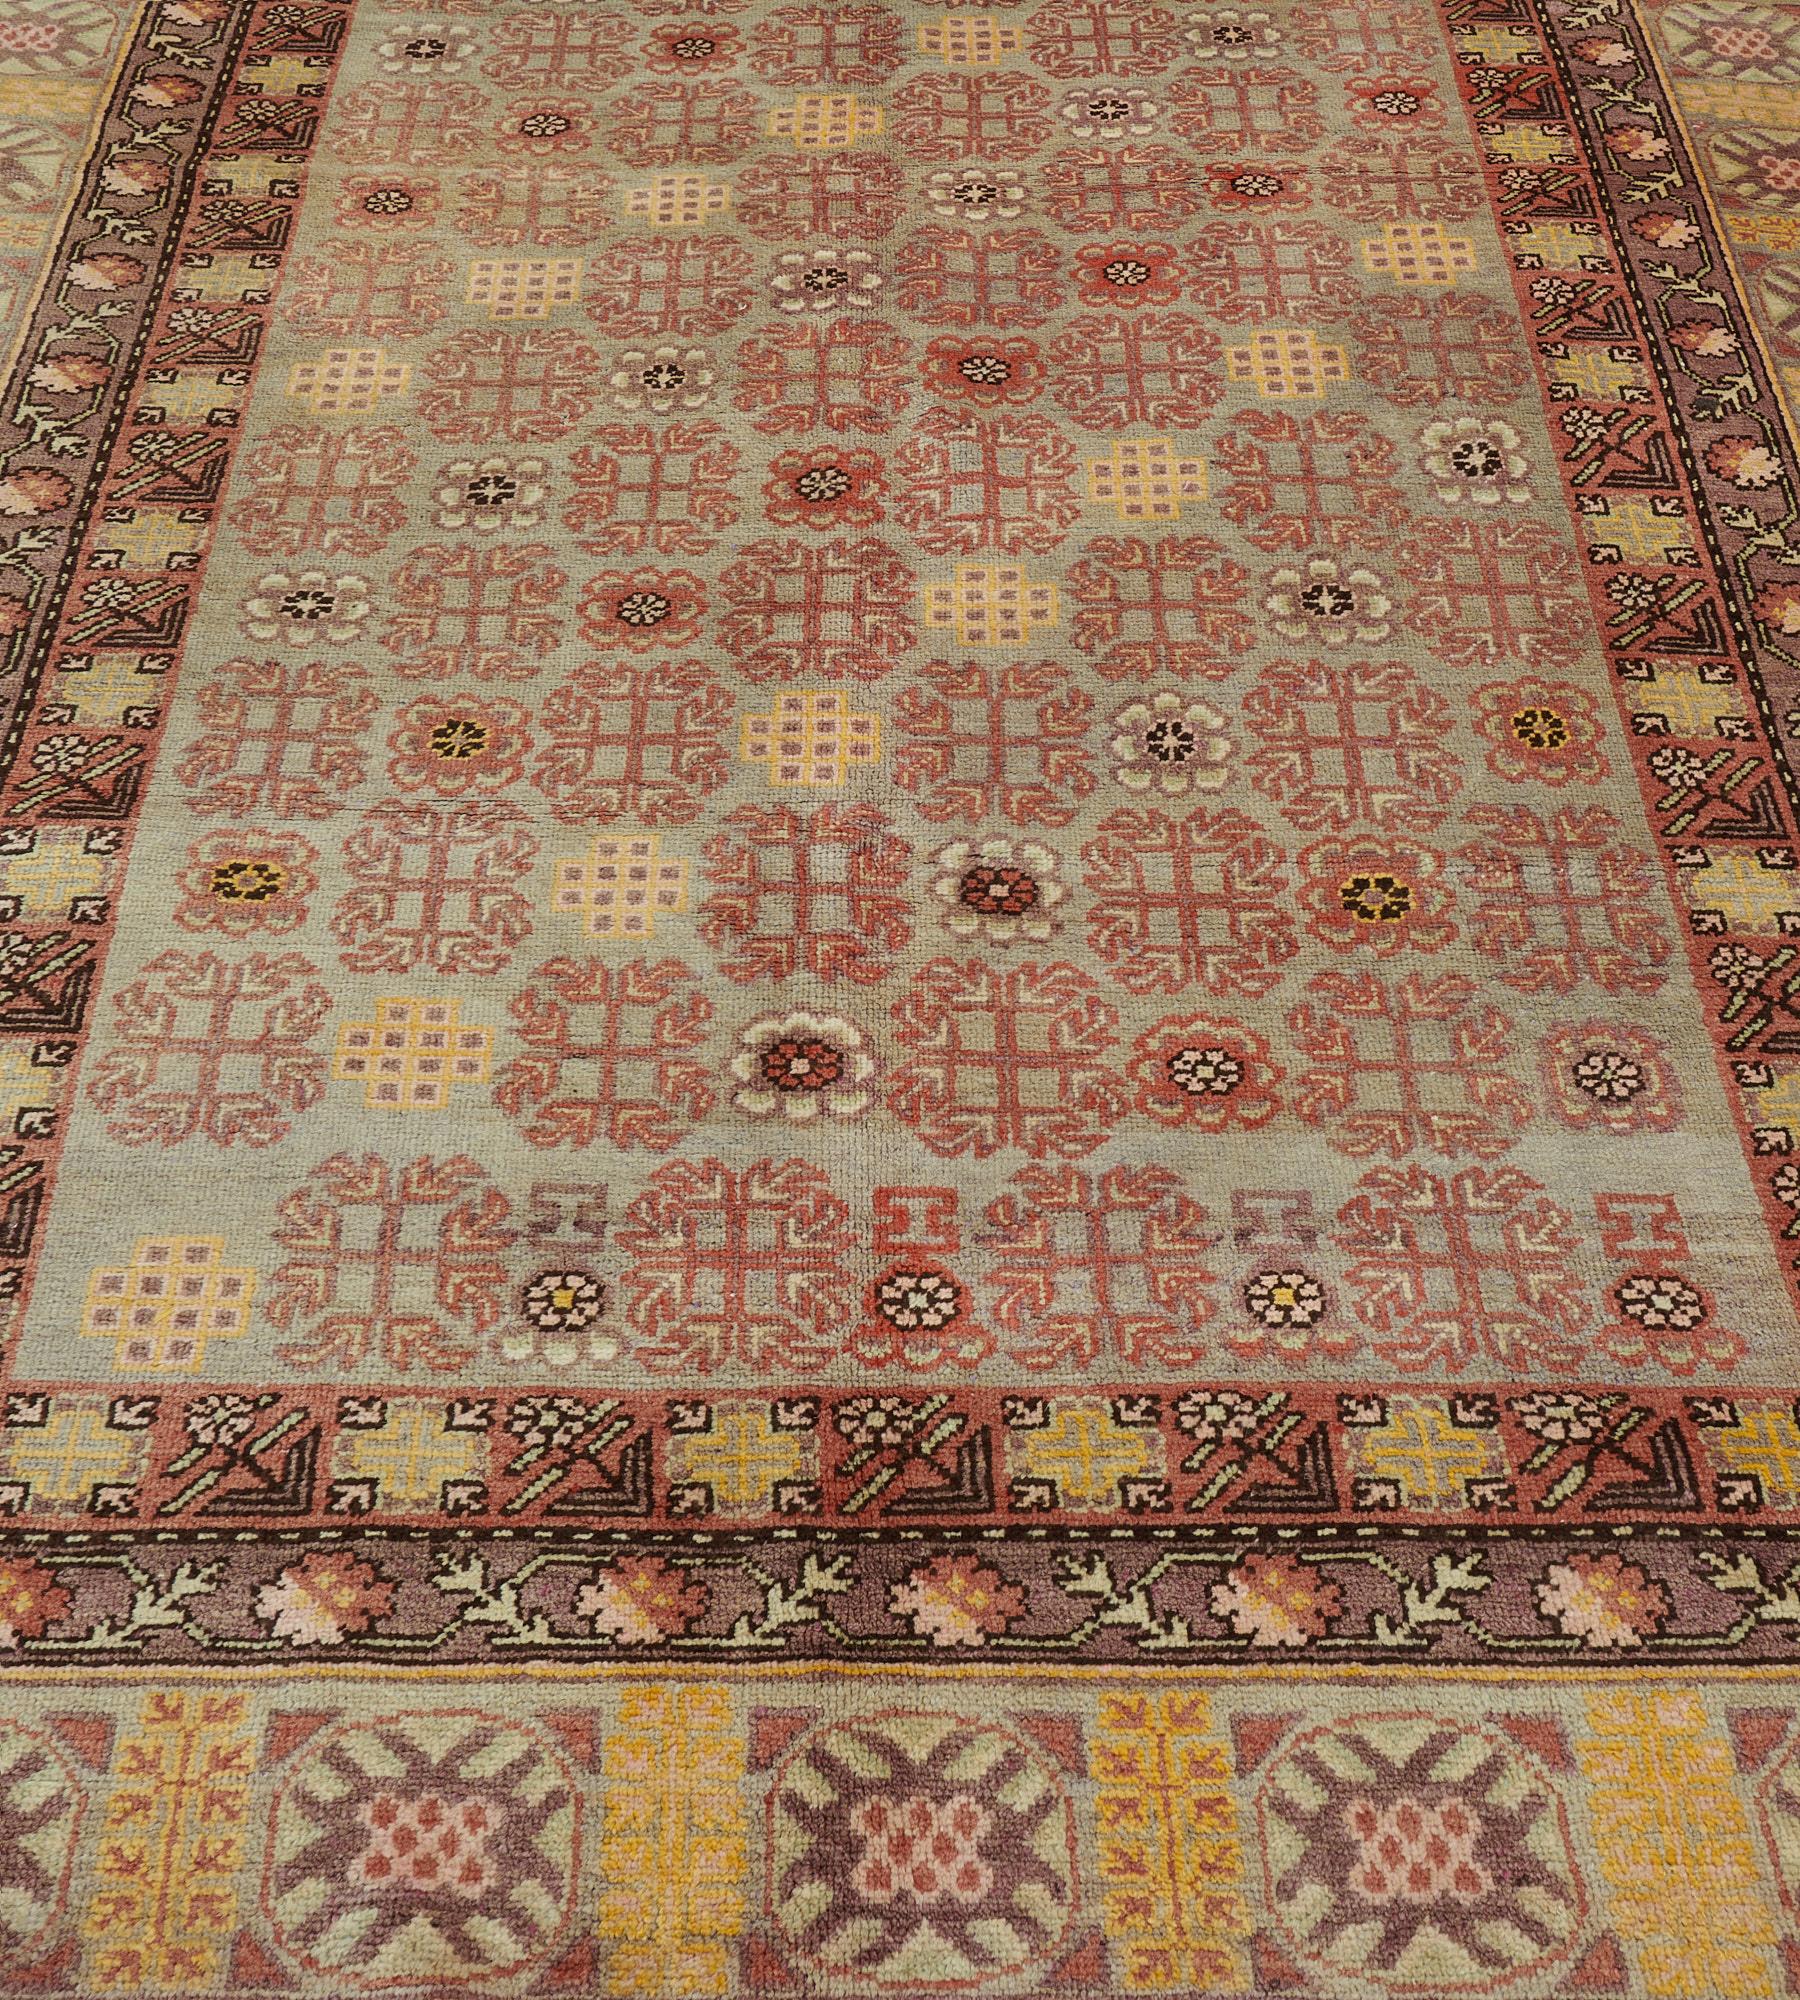 This antique Khotan rug has a pale blue field with diagonal rows of hooked terracotta-red floral motifs alternating with flowerheads and sandy-yellow stepped lozenges, in a pale blue border with hooked square panels divided by sandy-yellow floral